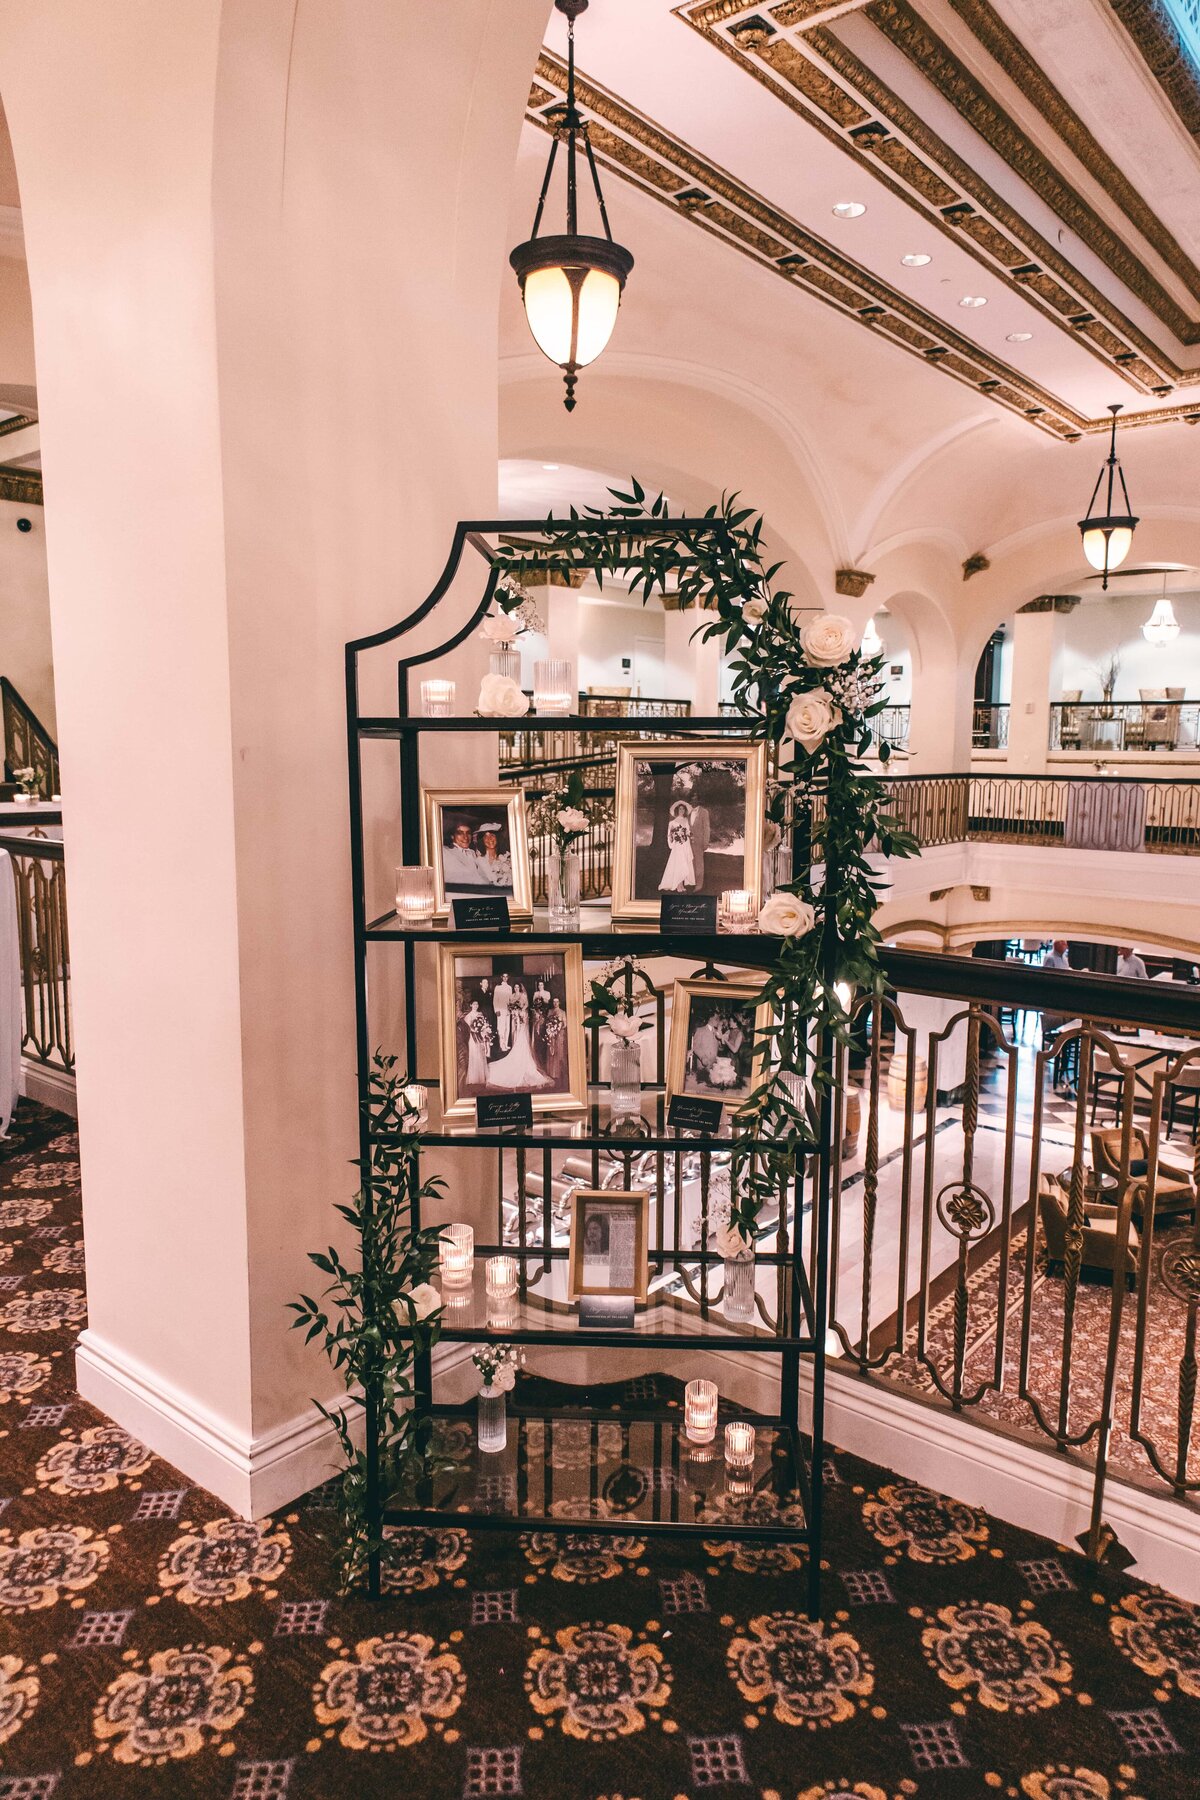 An elegantly decorated memorial with photos and candles on a metal stand in a hallway with arched ceilings and ornate light fixtures, perfect for events in Davenport.